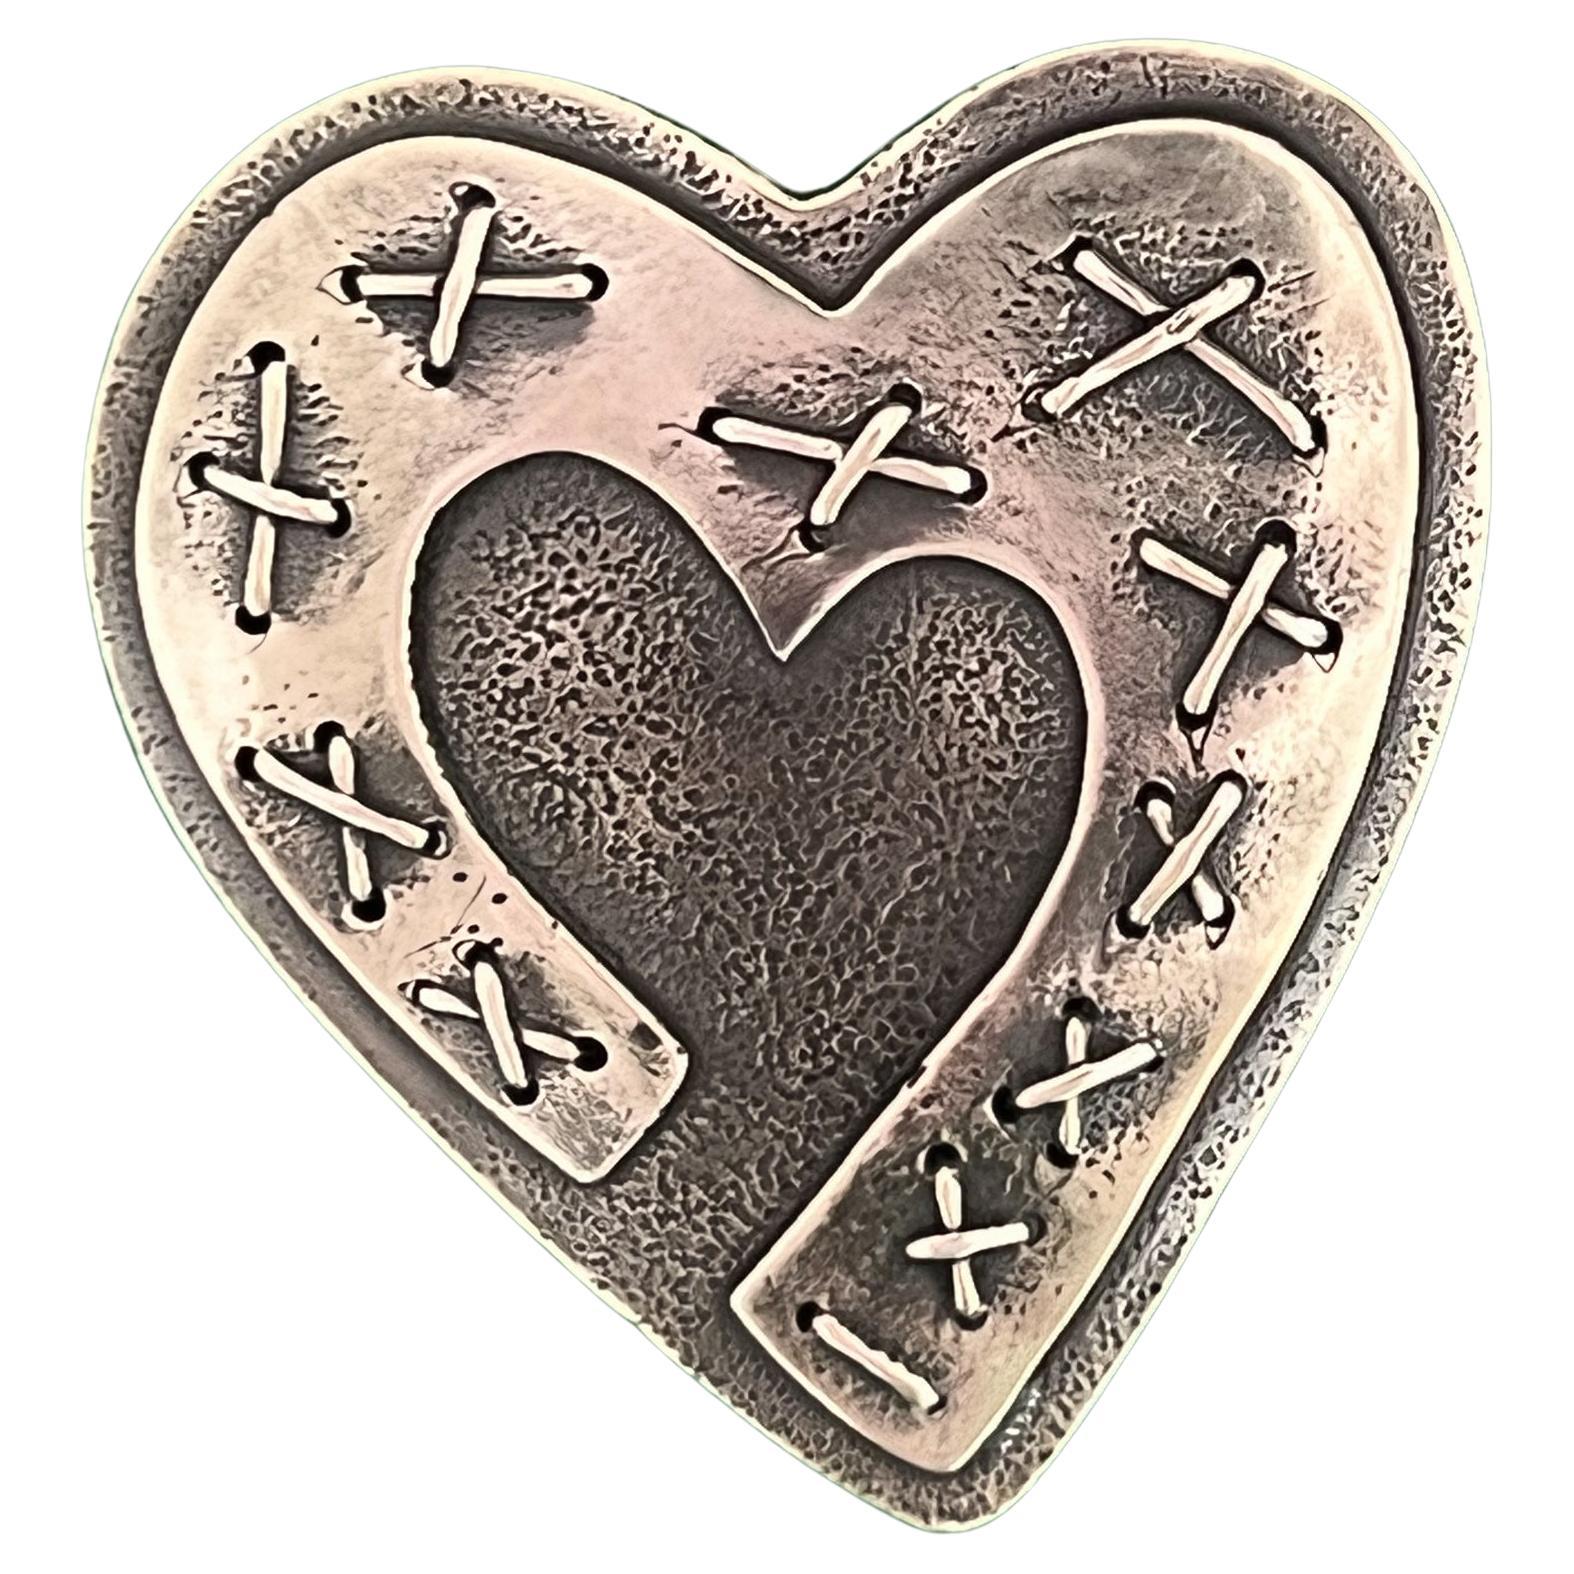 Mended by Kerry Green, sterling silver, pin, pendant, valentine, heart, modern